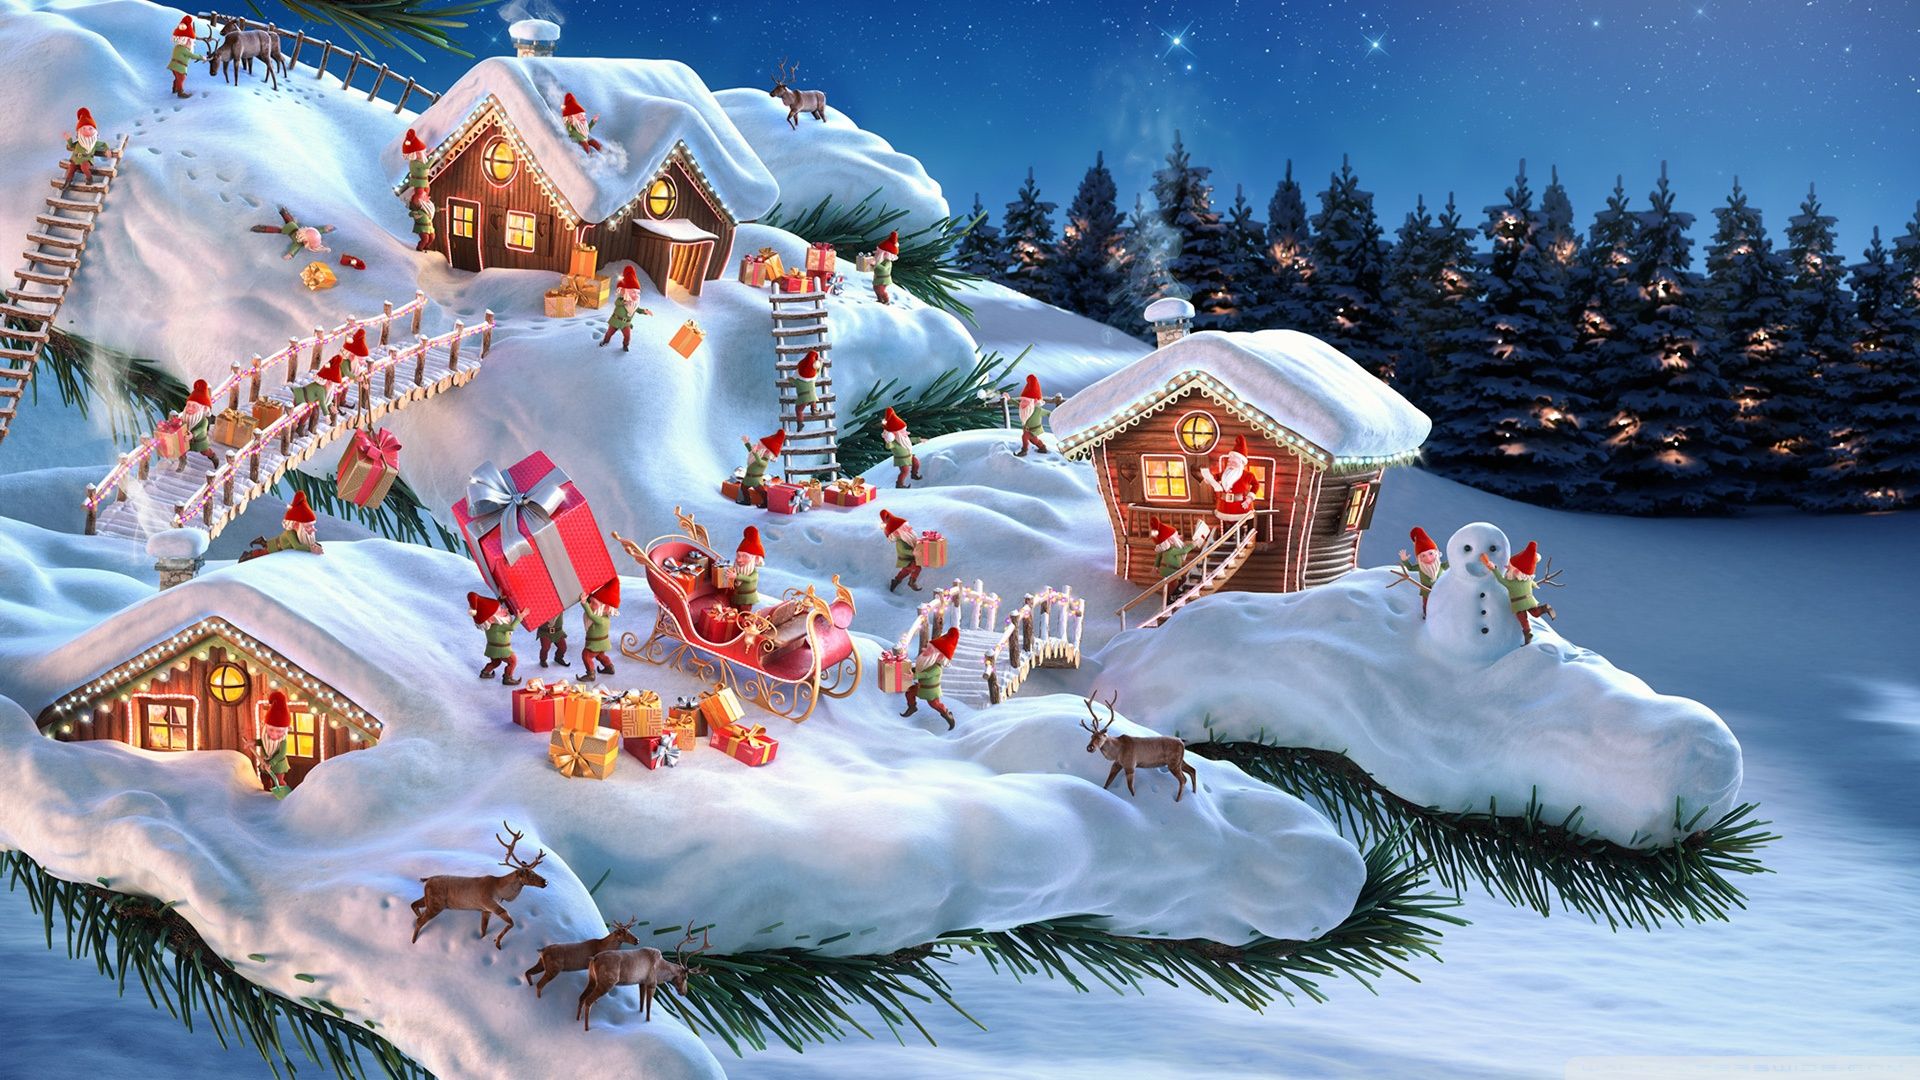 4400 Christmas HD Wallpapers and Backgrounds